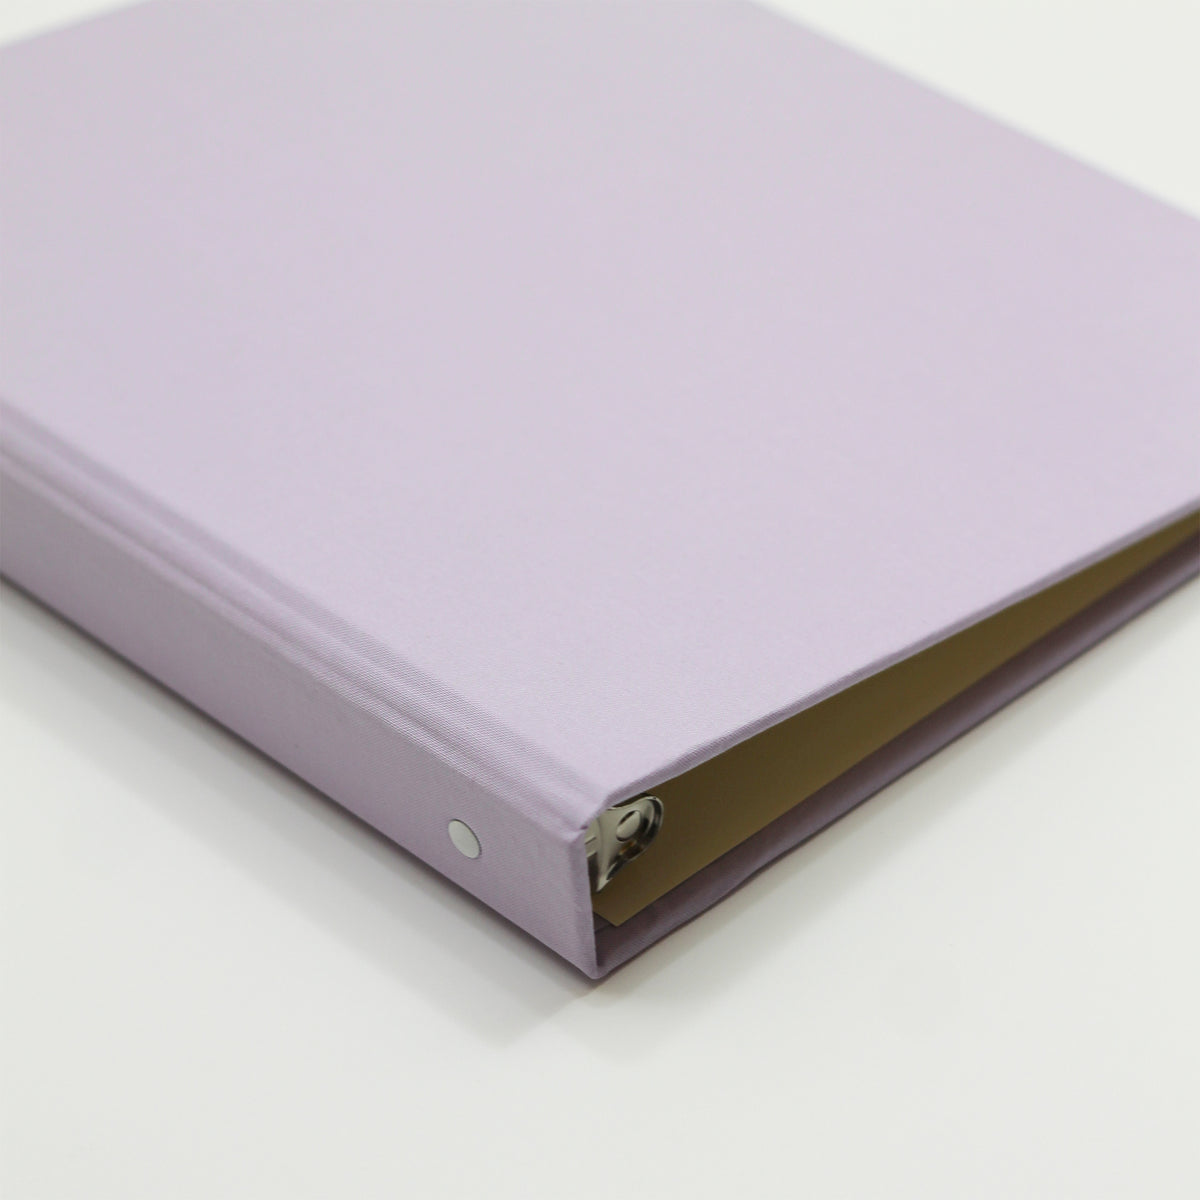 Large Photo Binder (for 4x6 photos) with Lavender Cotton Cover